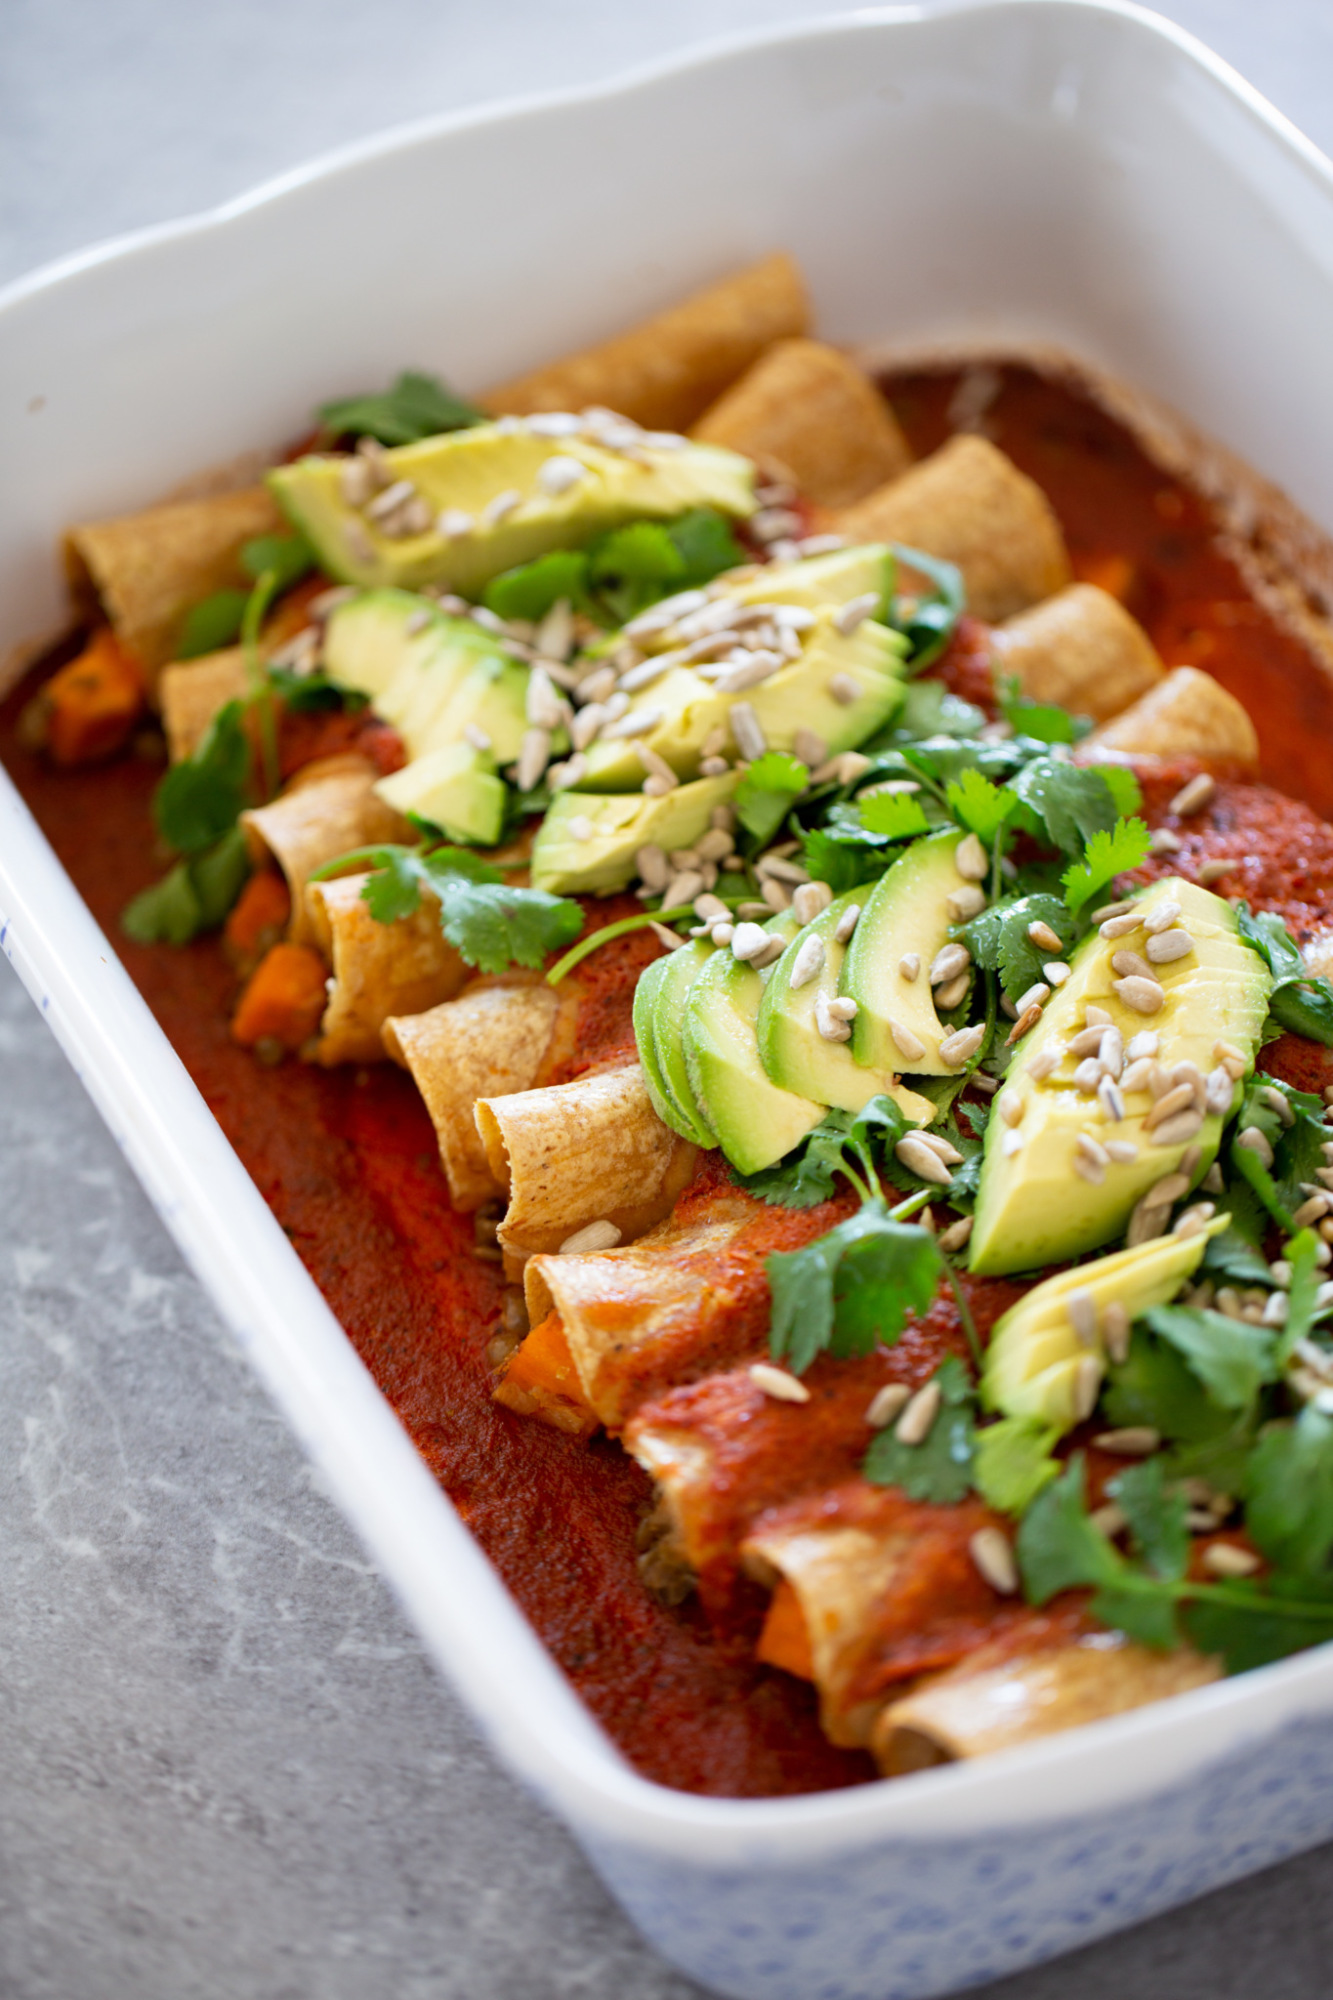 vegan enchiladas with lentils, sweet potaotes and chile ancho sauce. Topped with avocado